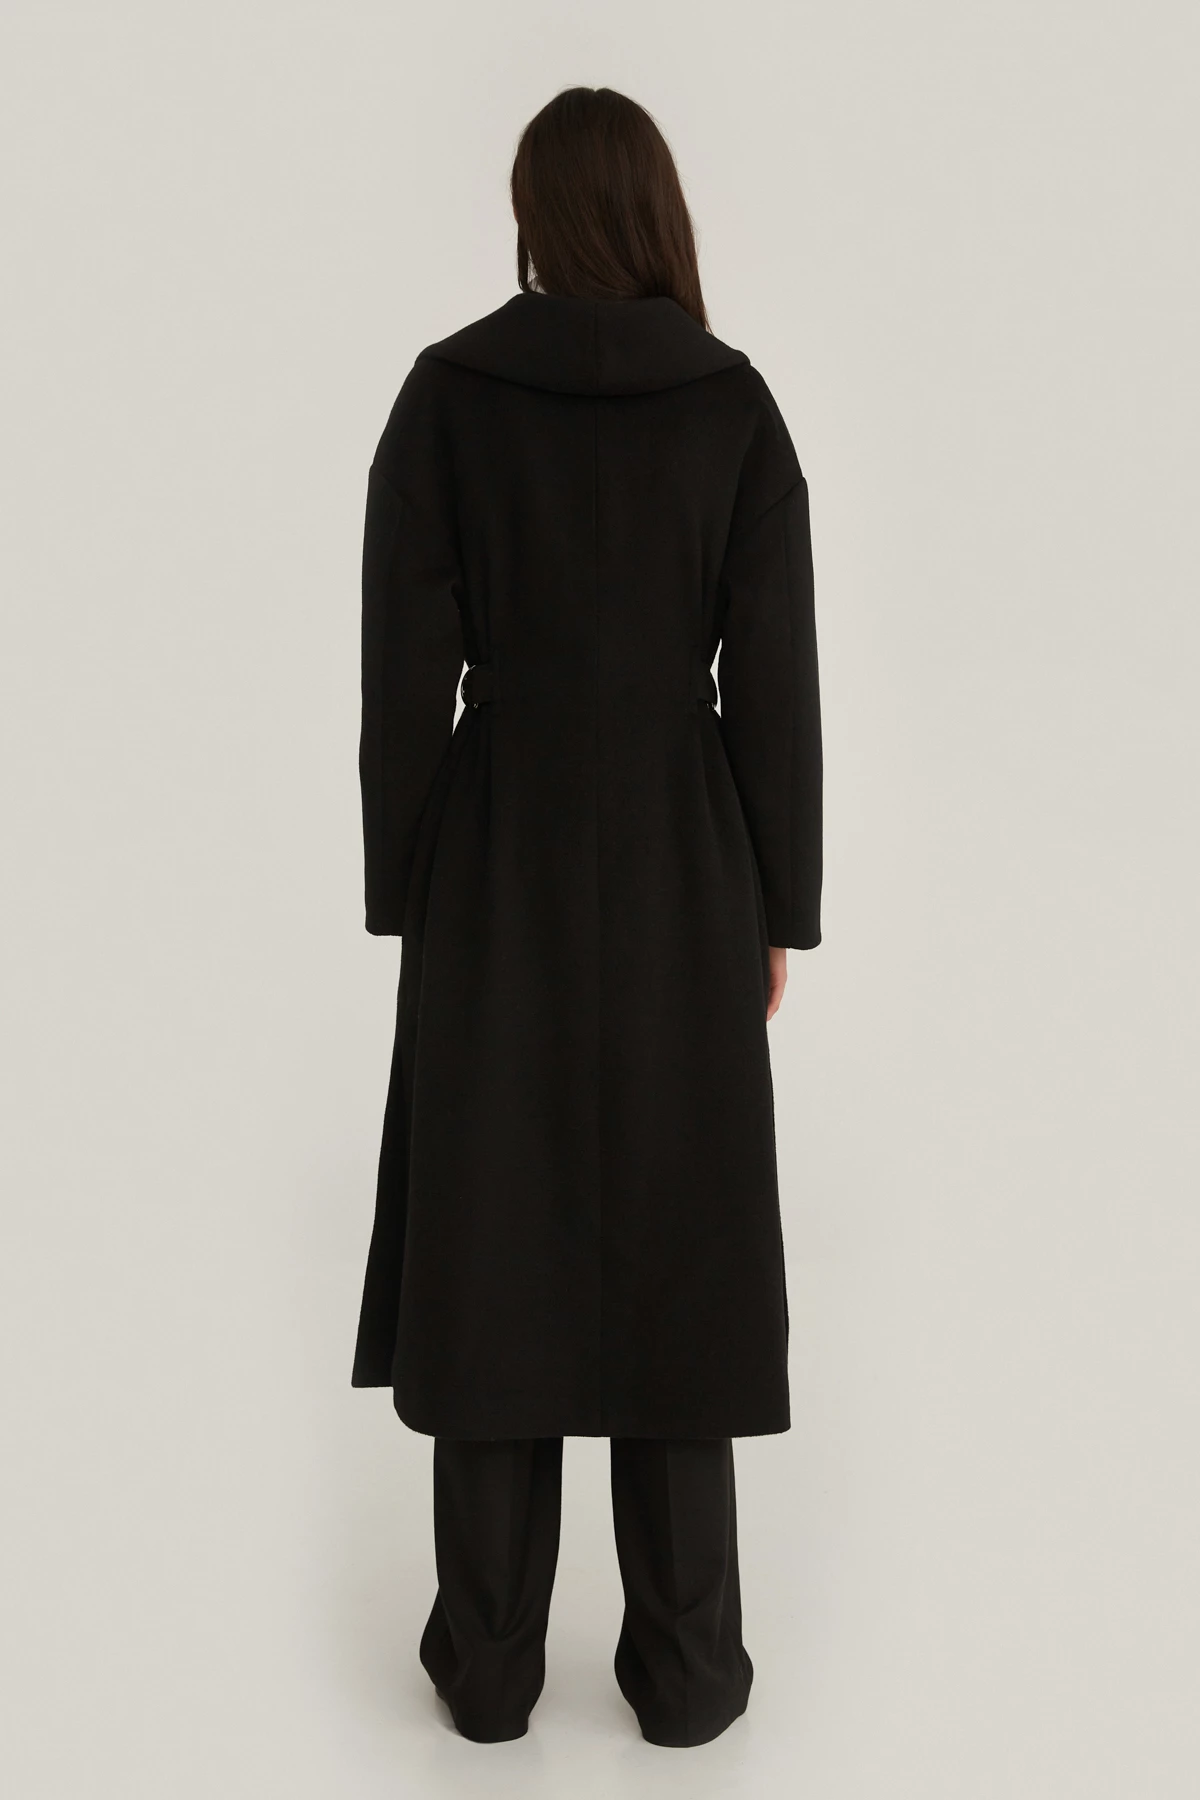 Long black coat with wool, photo 5